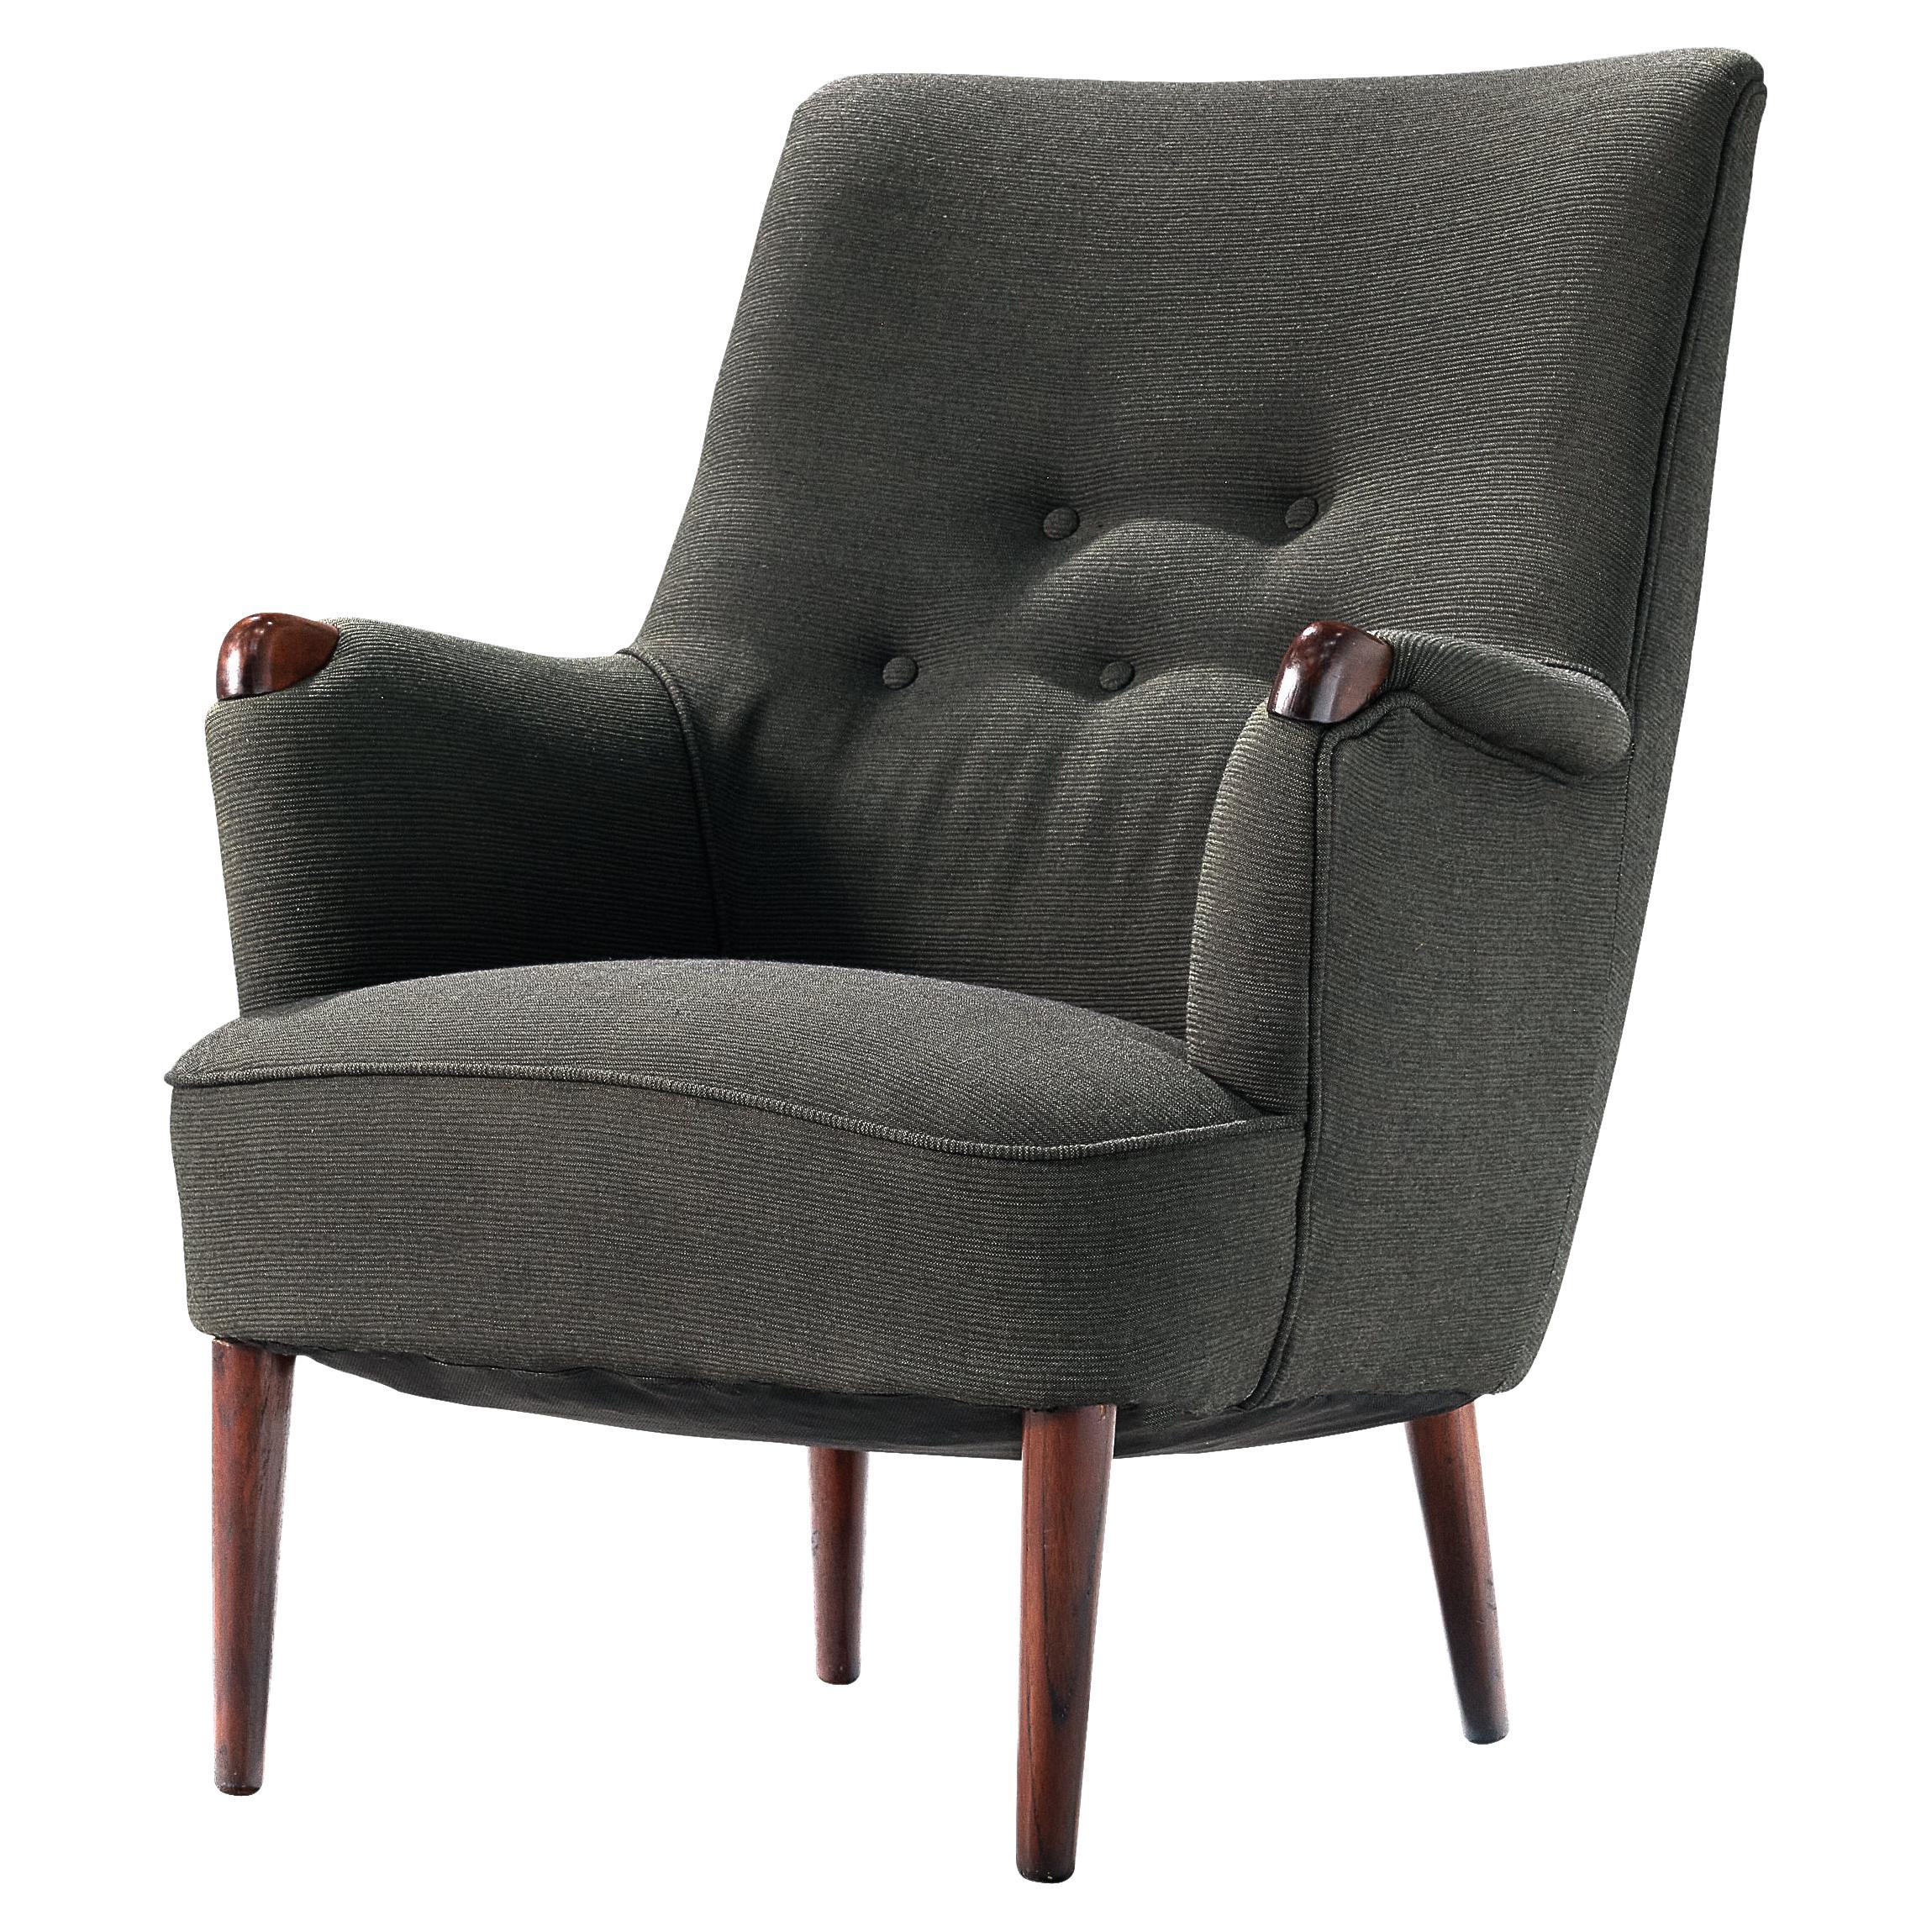  Scandinavian Wingback Lounge Chair in Grey Upholstery and Teak